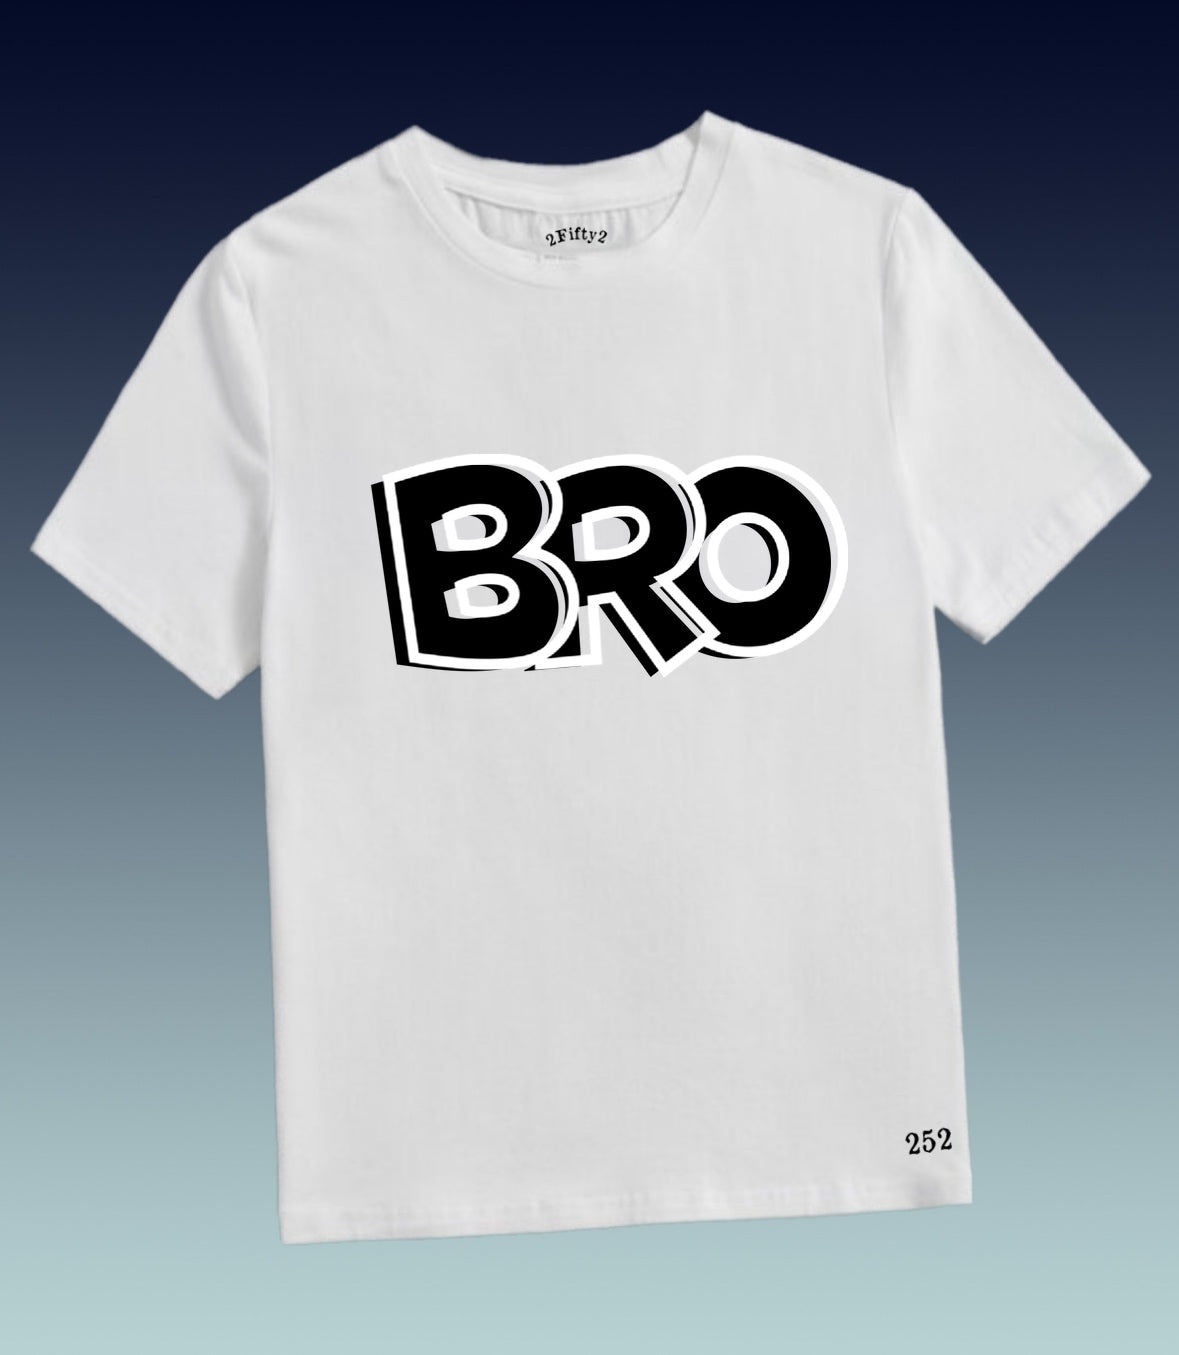 Boys (Bro) tees by The 2Fifty2 Brand